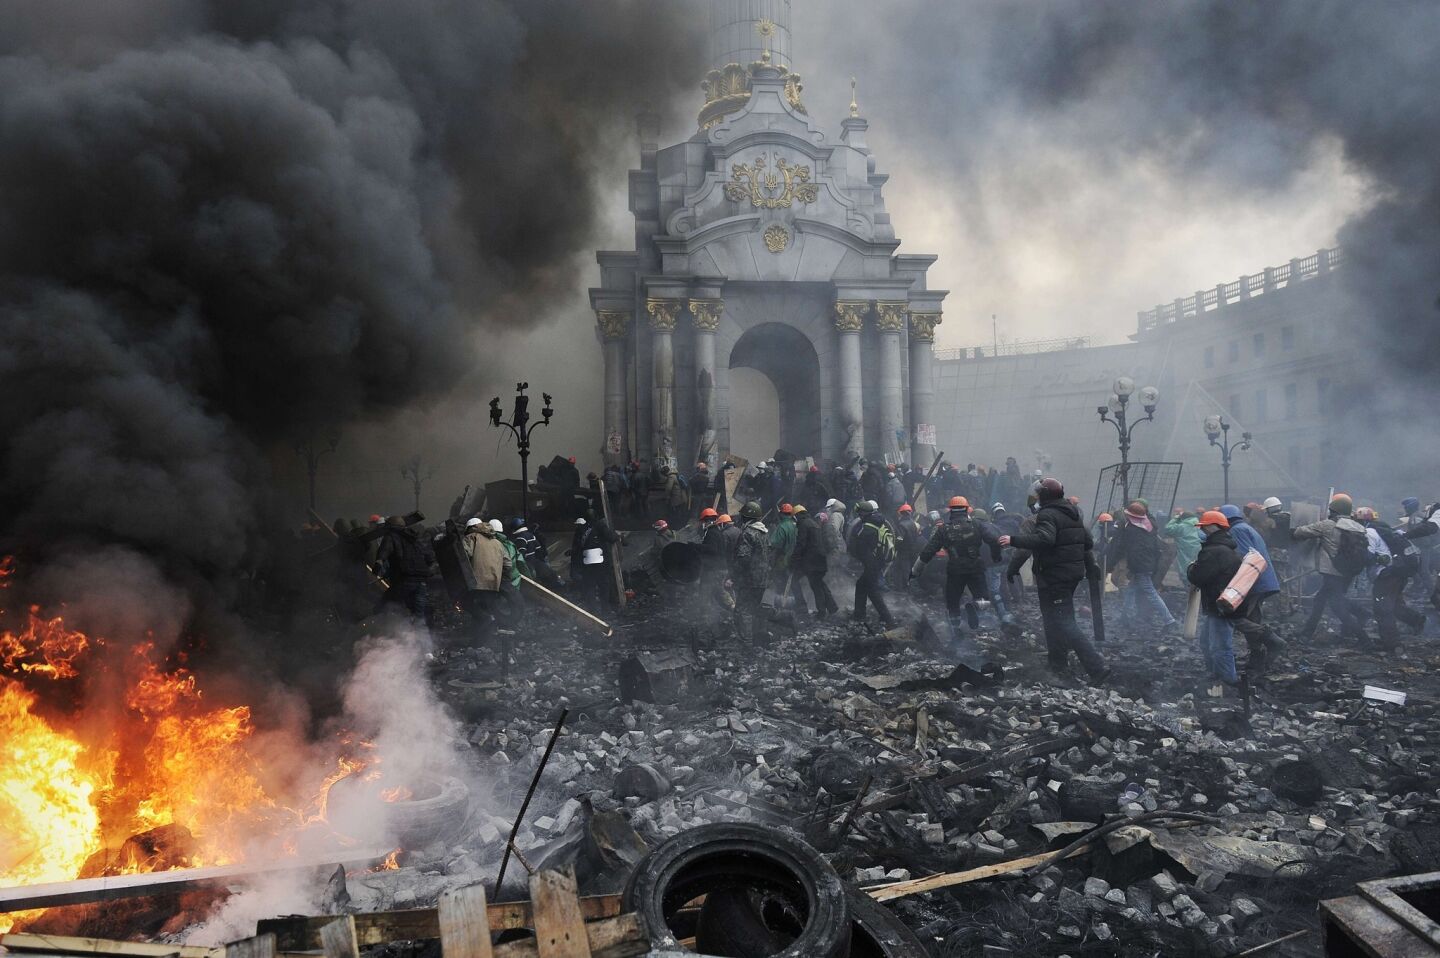 Ukrainian protesters advance toward new positions in Kiev as a truce broke down and clashes with police renewed.